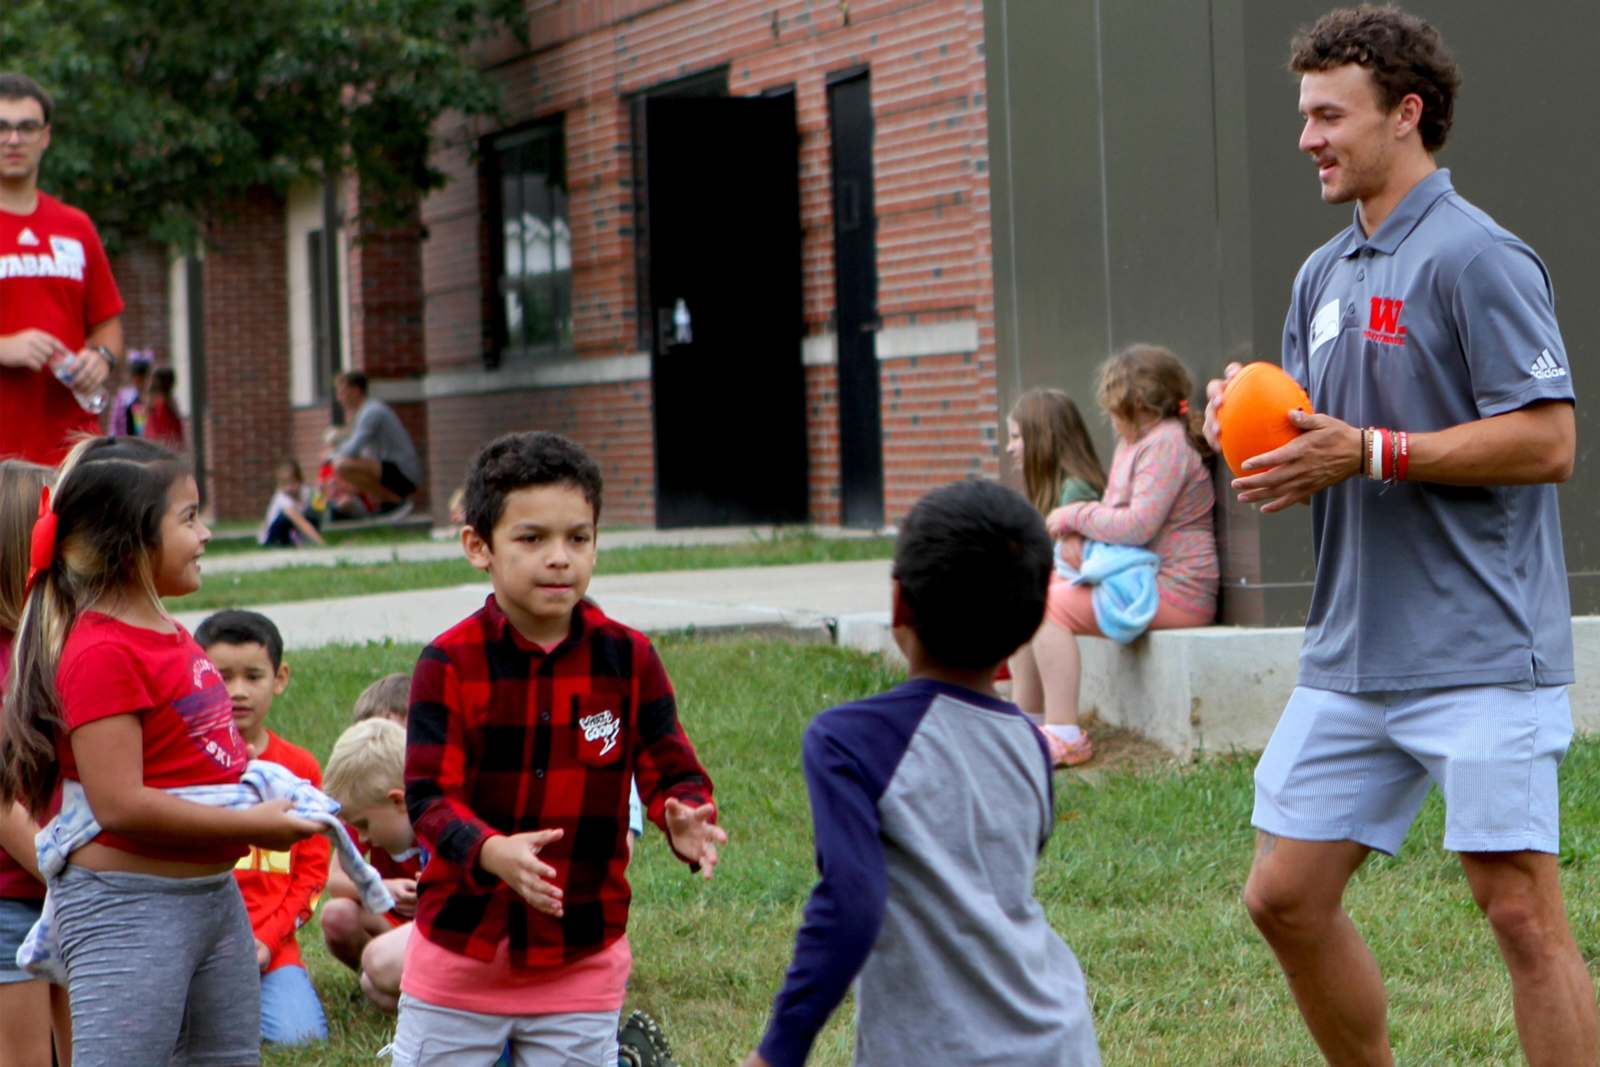 a man holding an orange object in front of a group of children